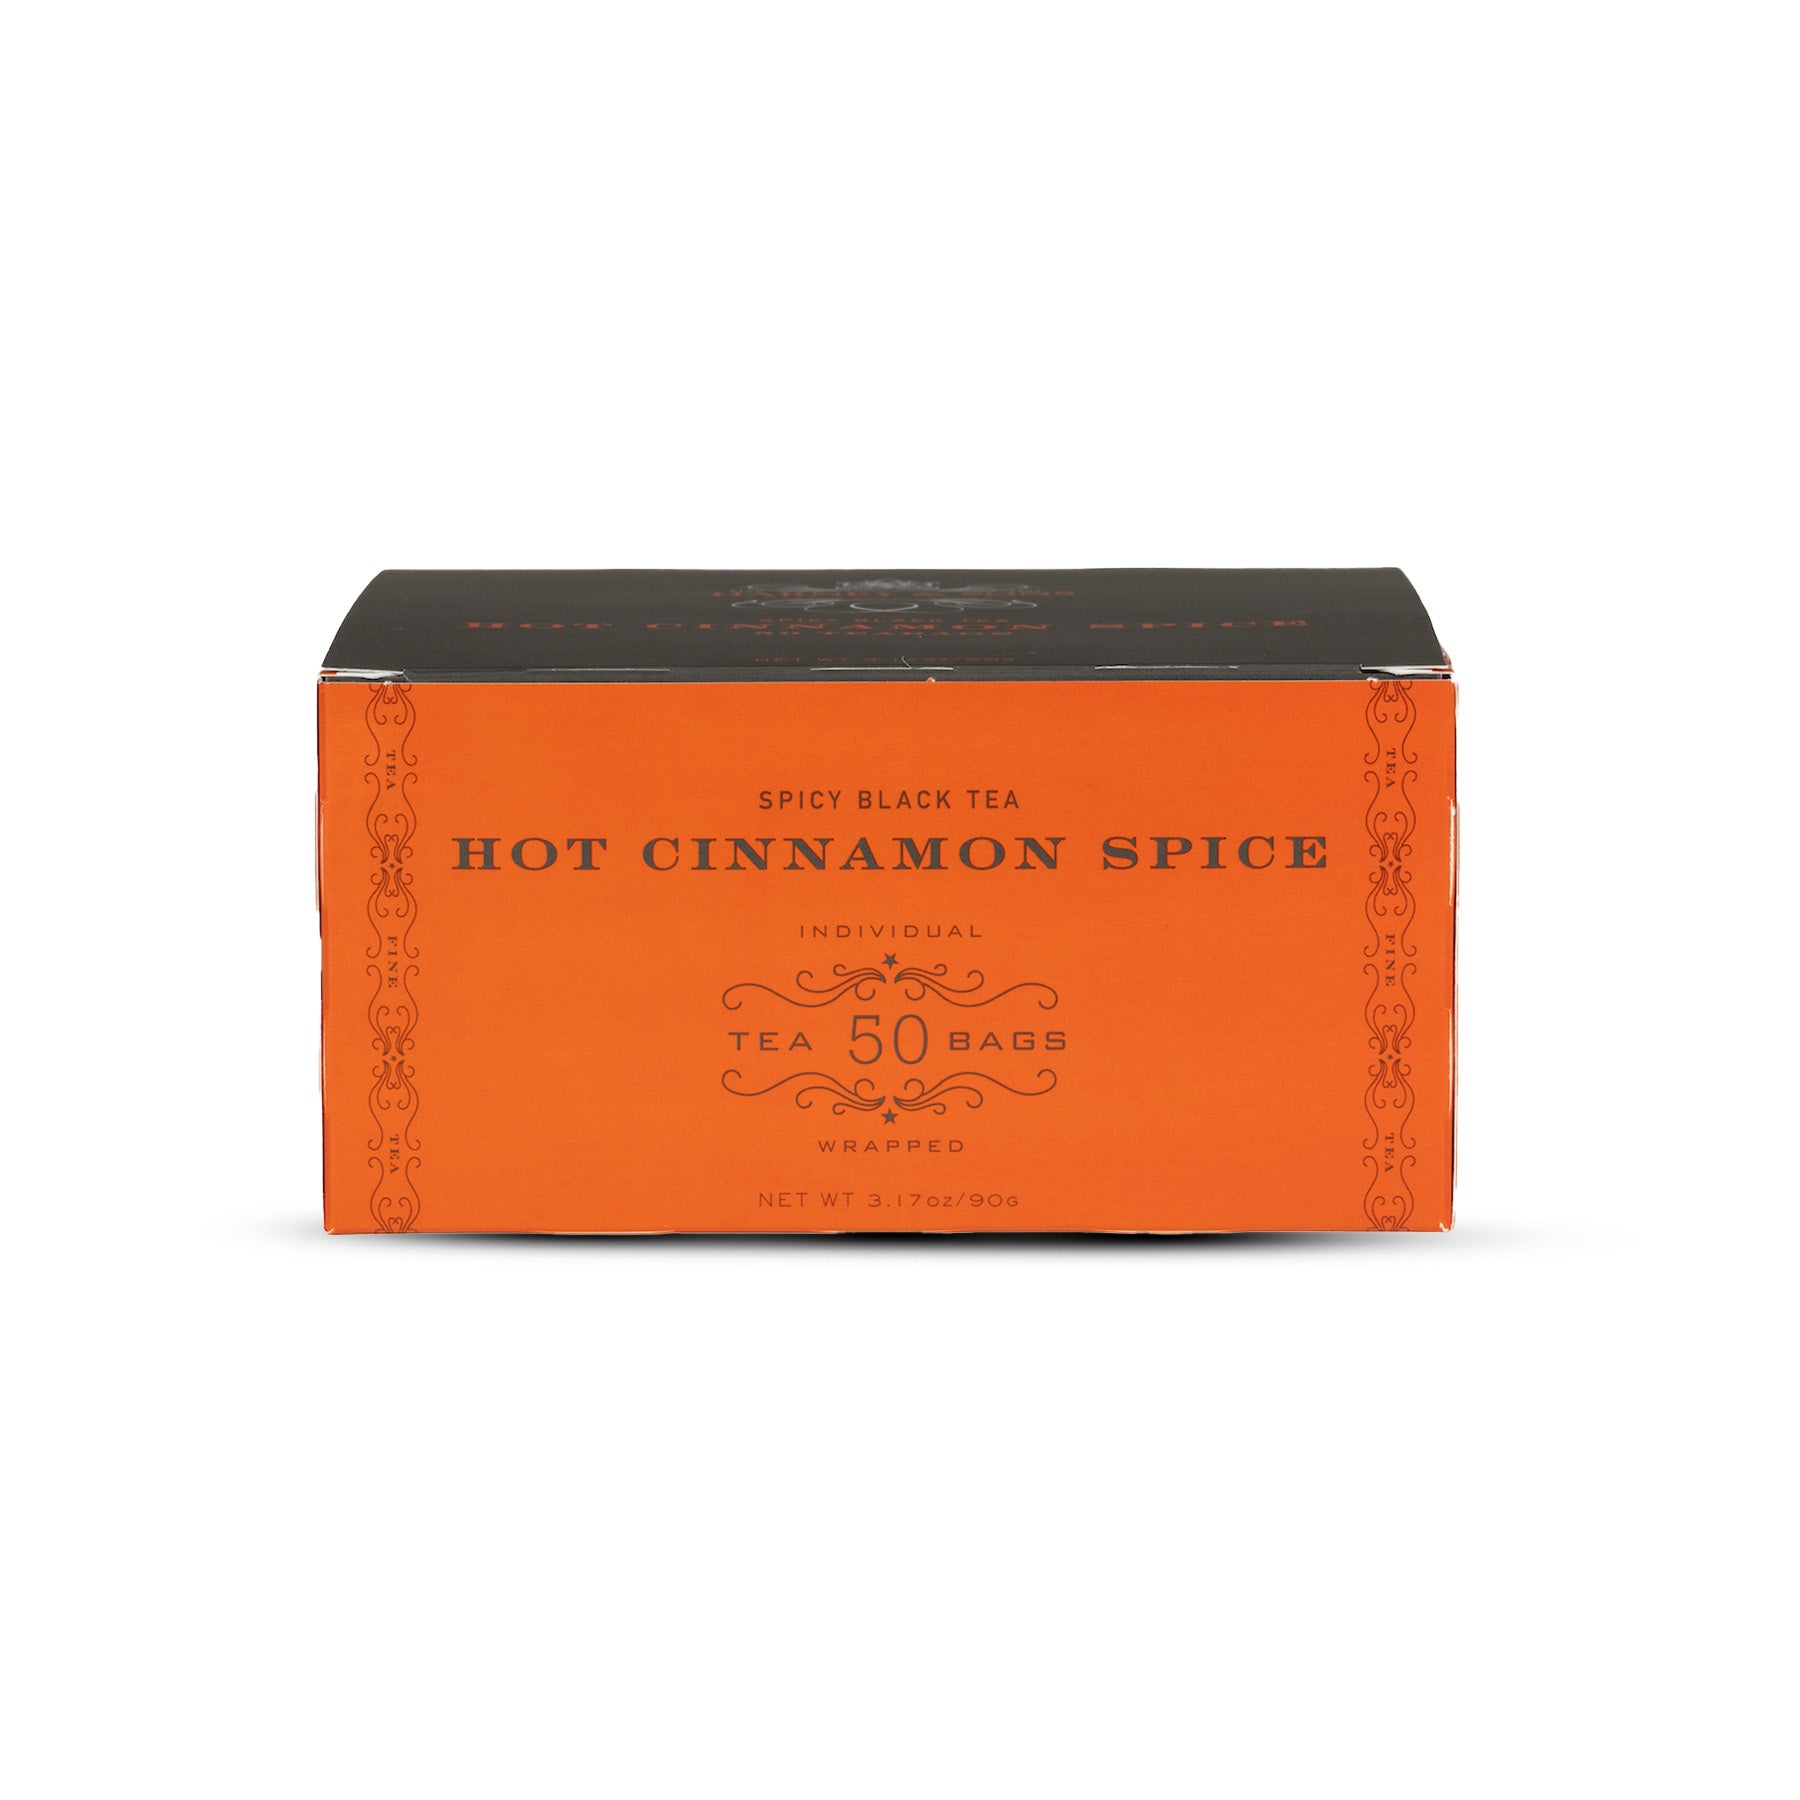 Hot Cinnamon Spice - Box of 50ct Foil Wrapped Teabags - Harney & Sons Fine Teas Europe